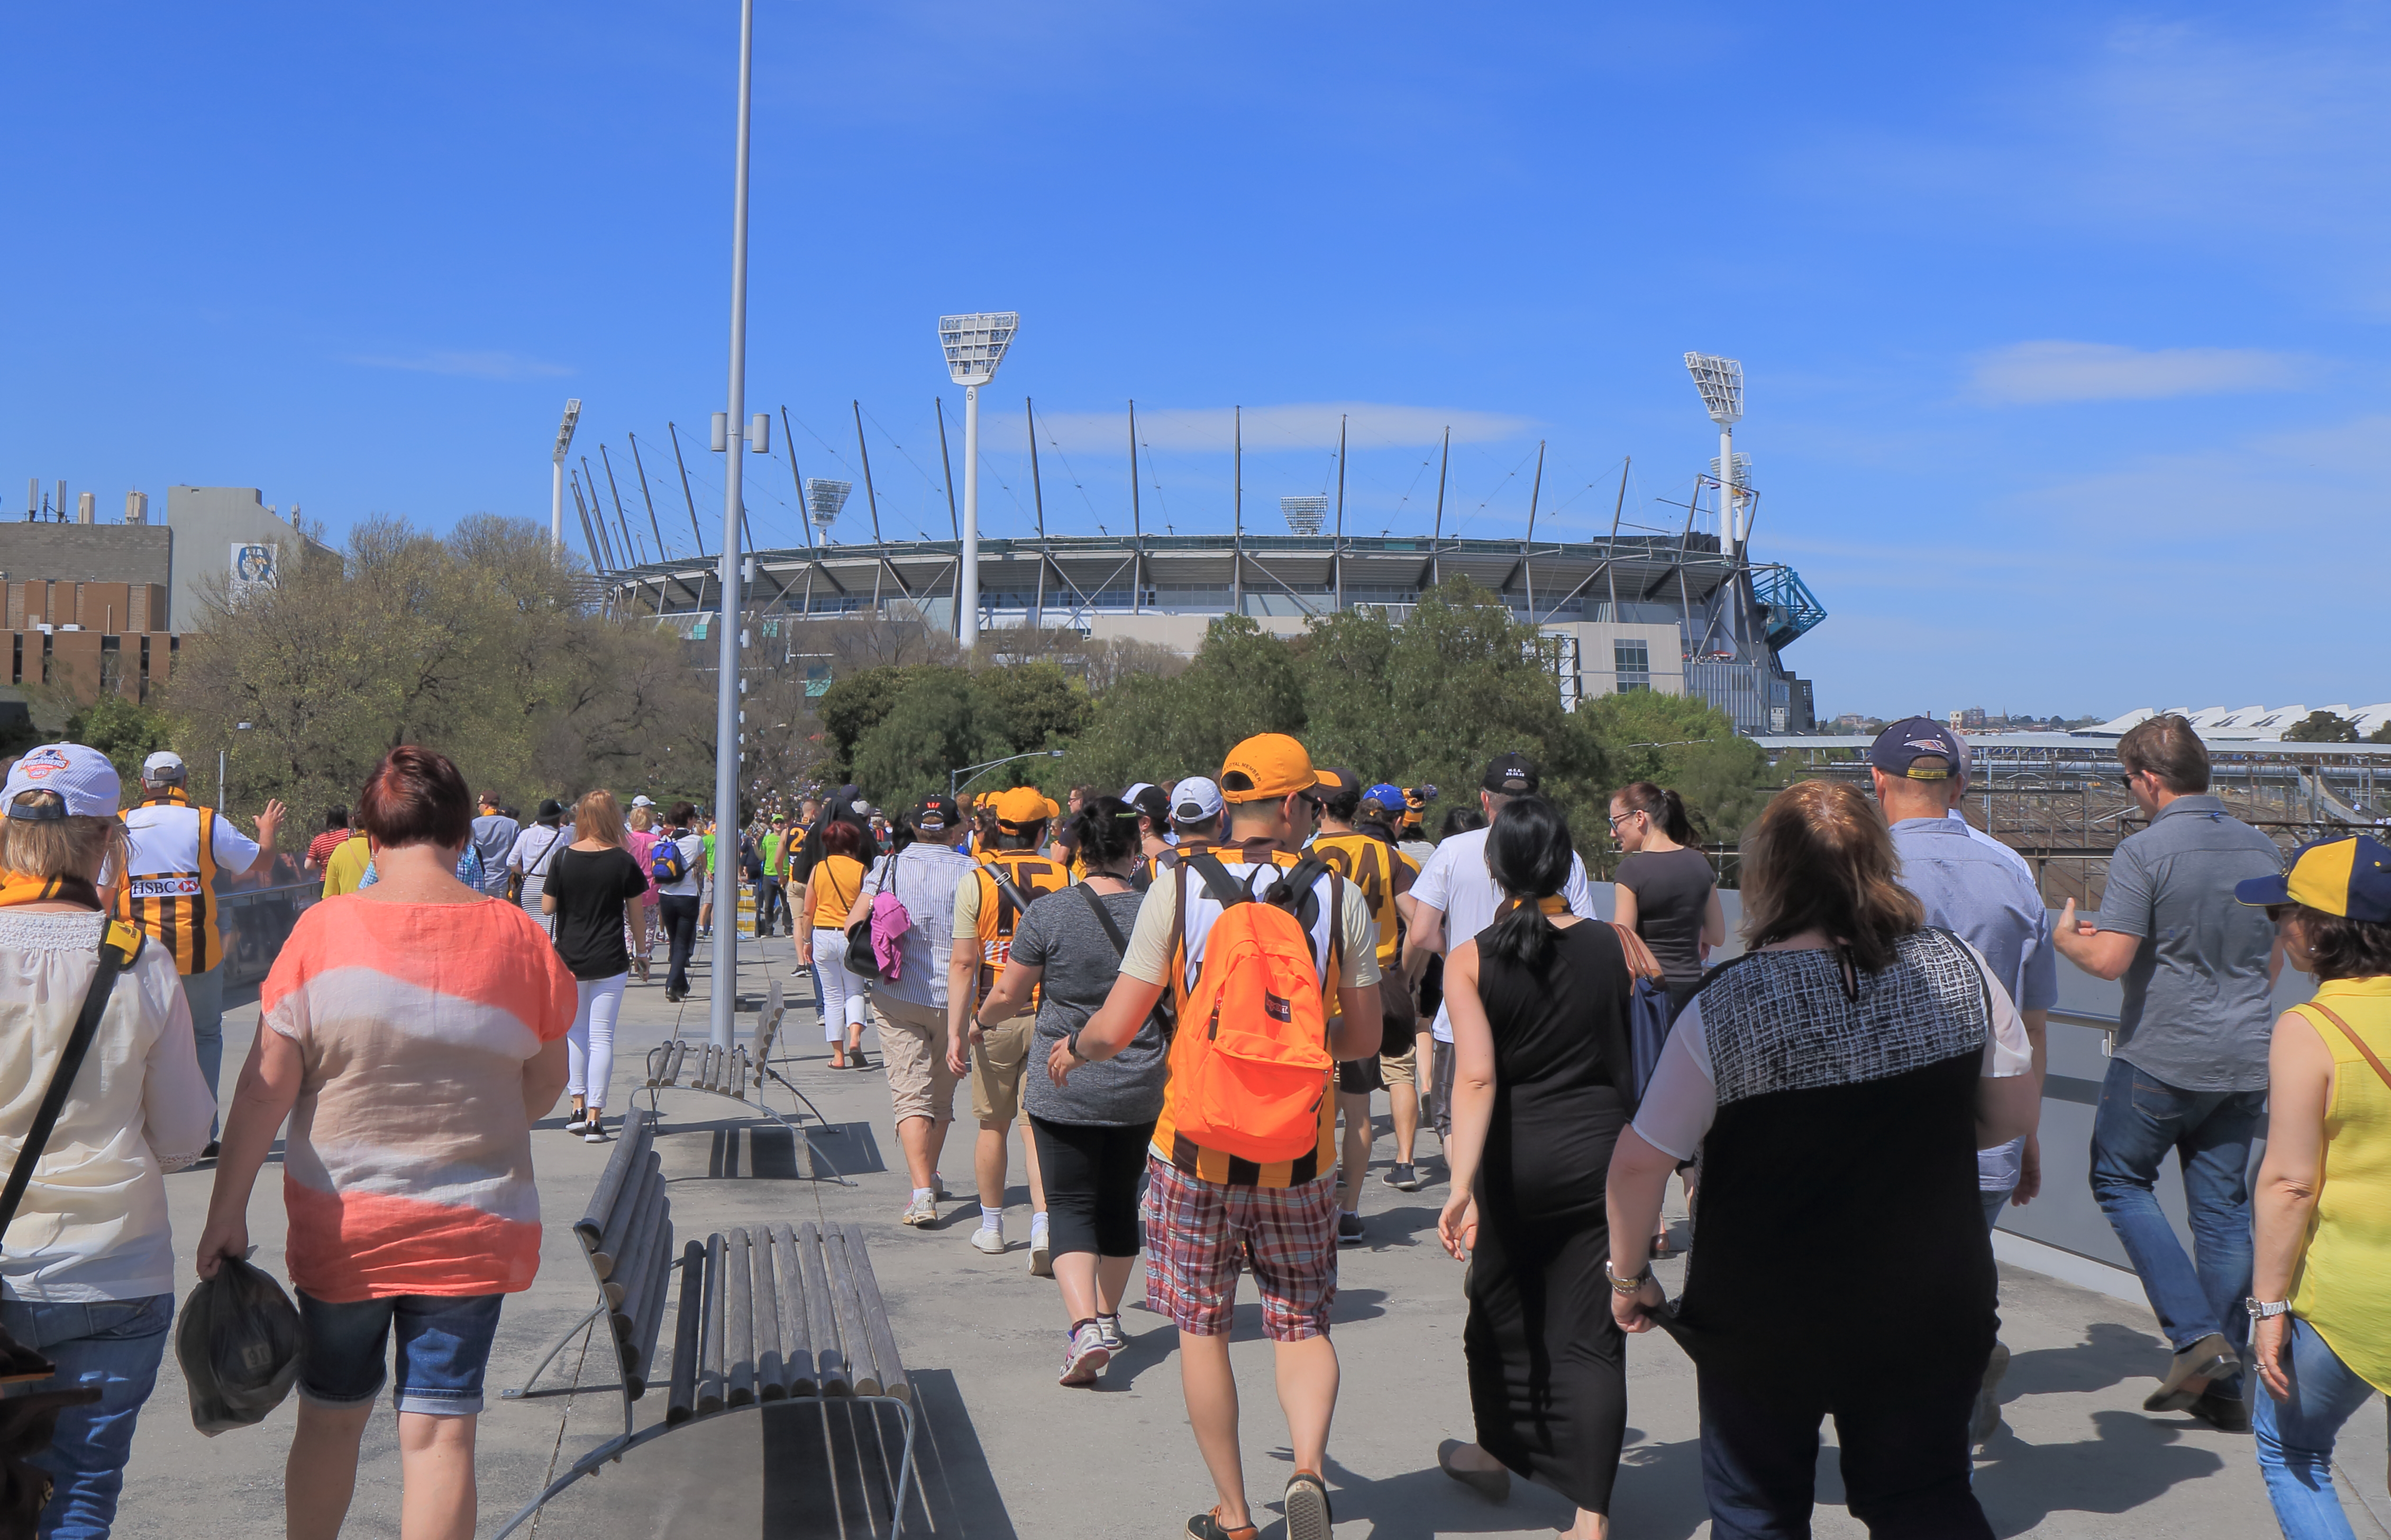 While more public transport options are welcome, footy fans have a role to play too in physical distancing. 